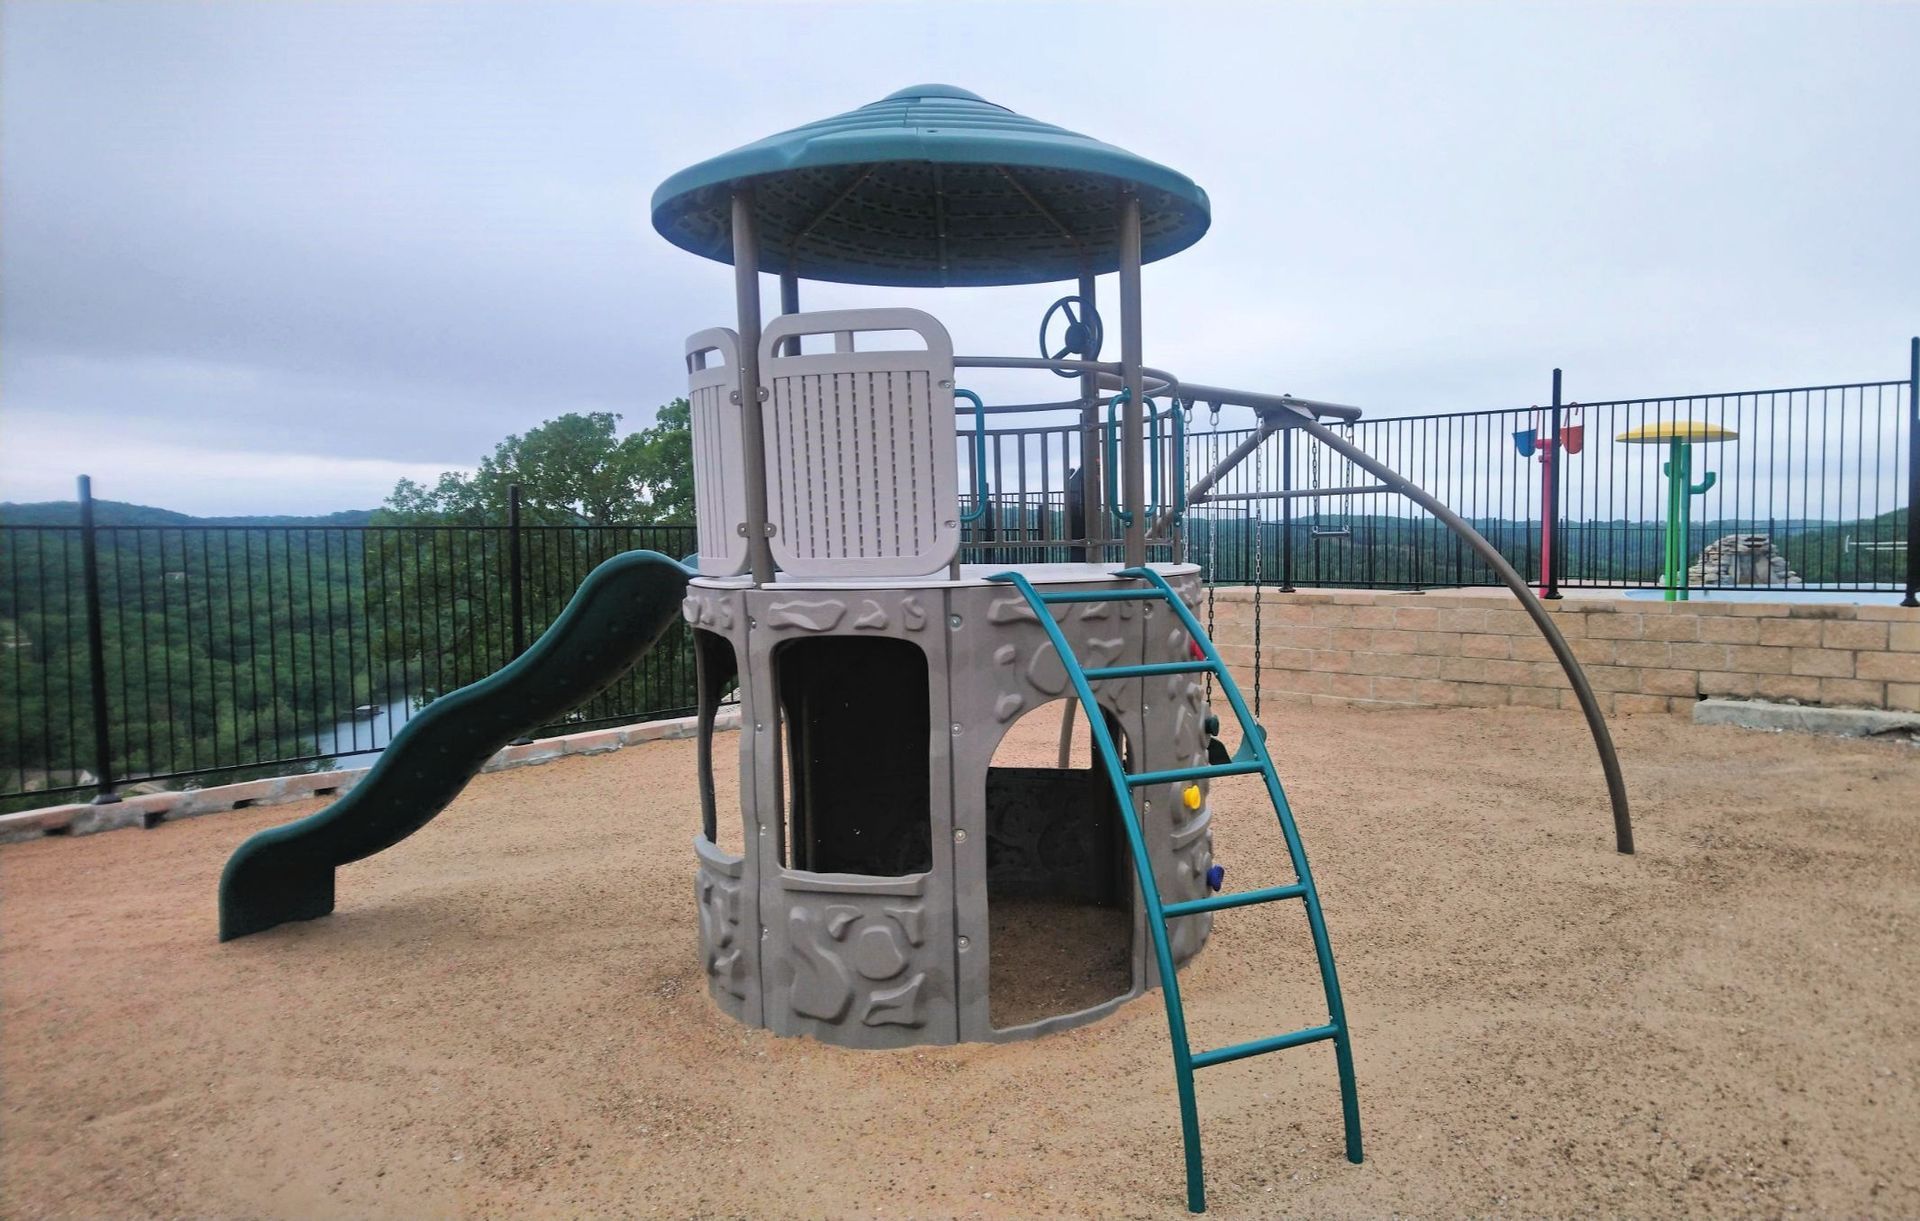 Enclosed playground with rubber mulch for the little ones !